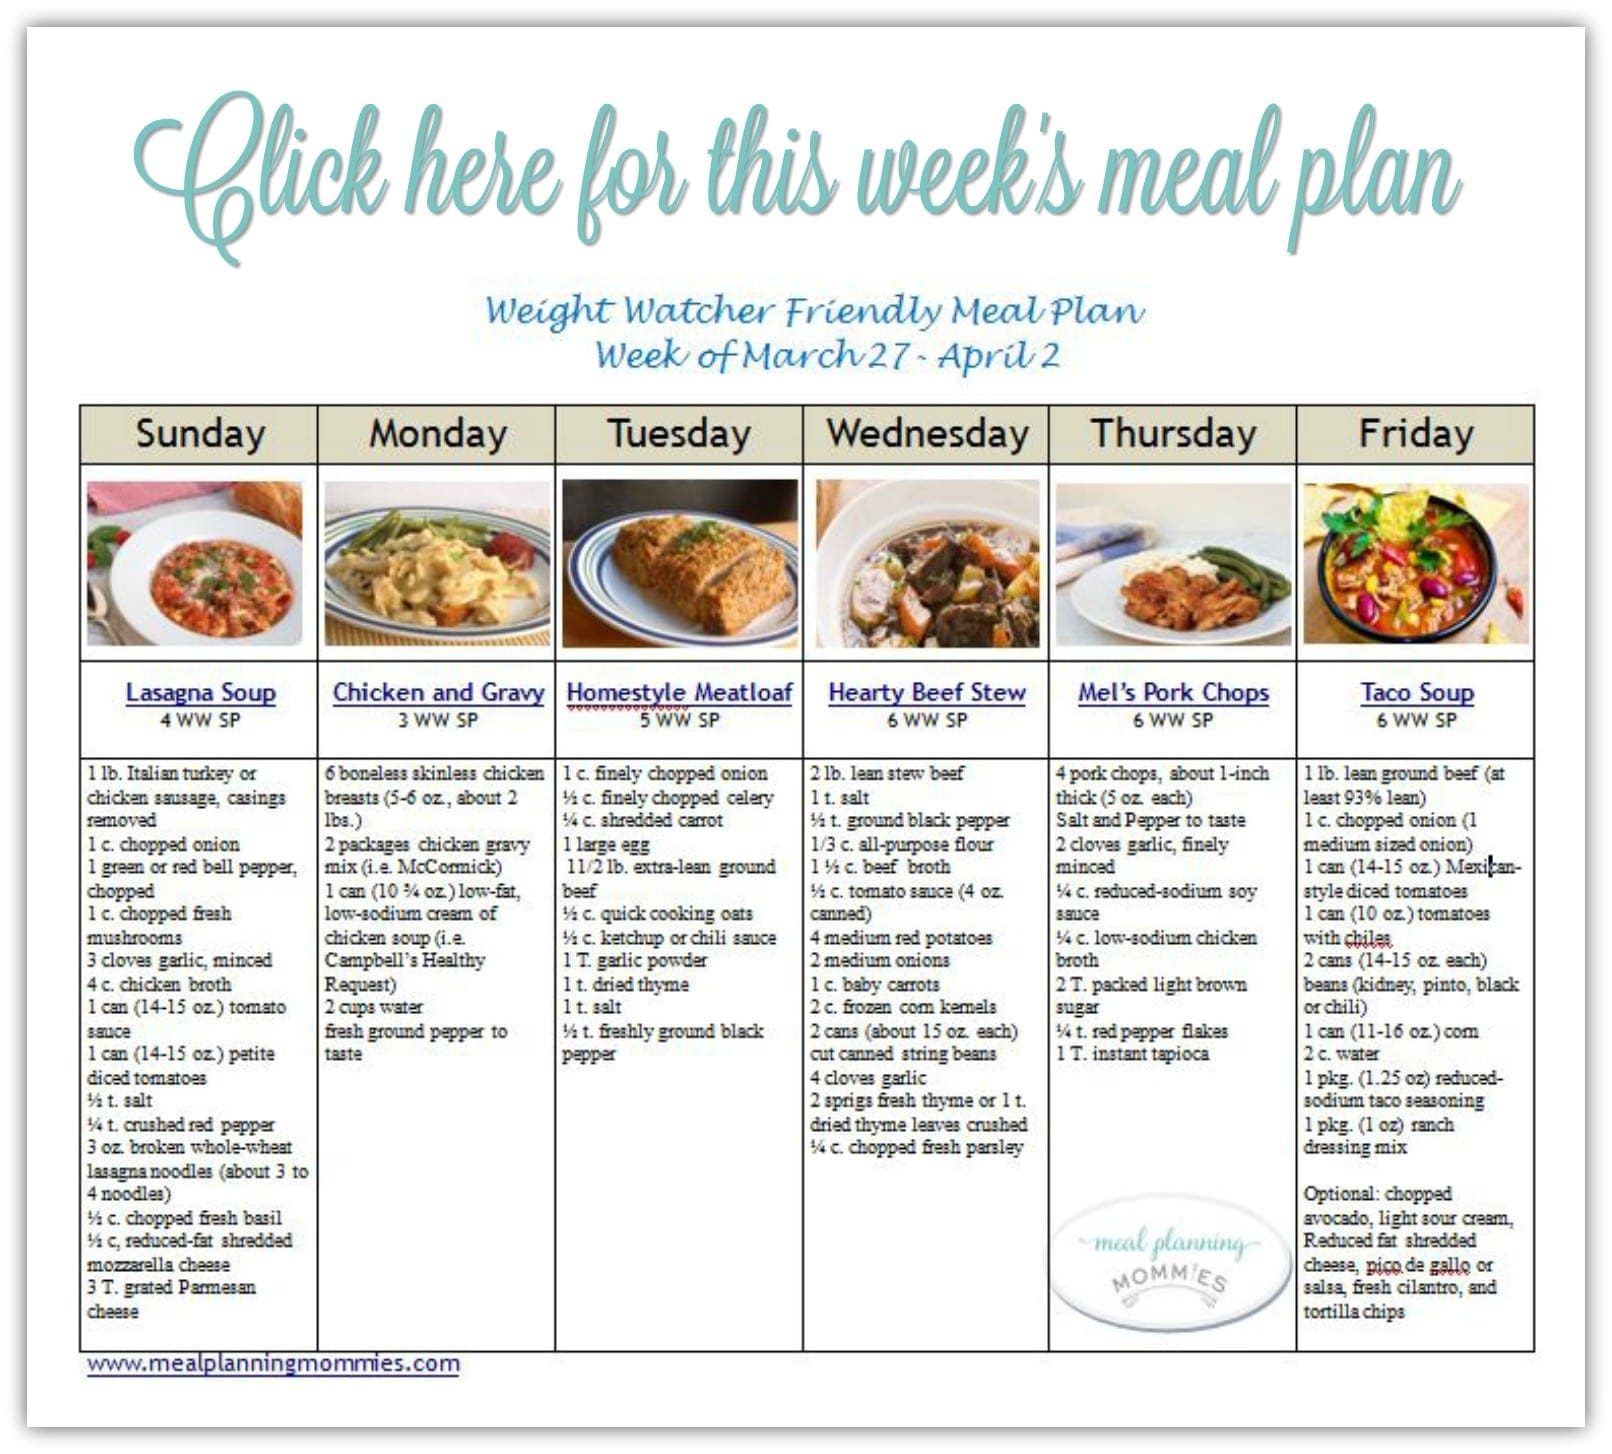 pic of meal plan